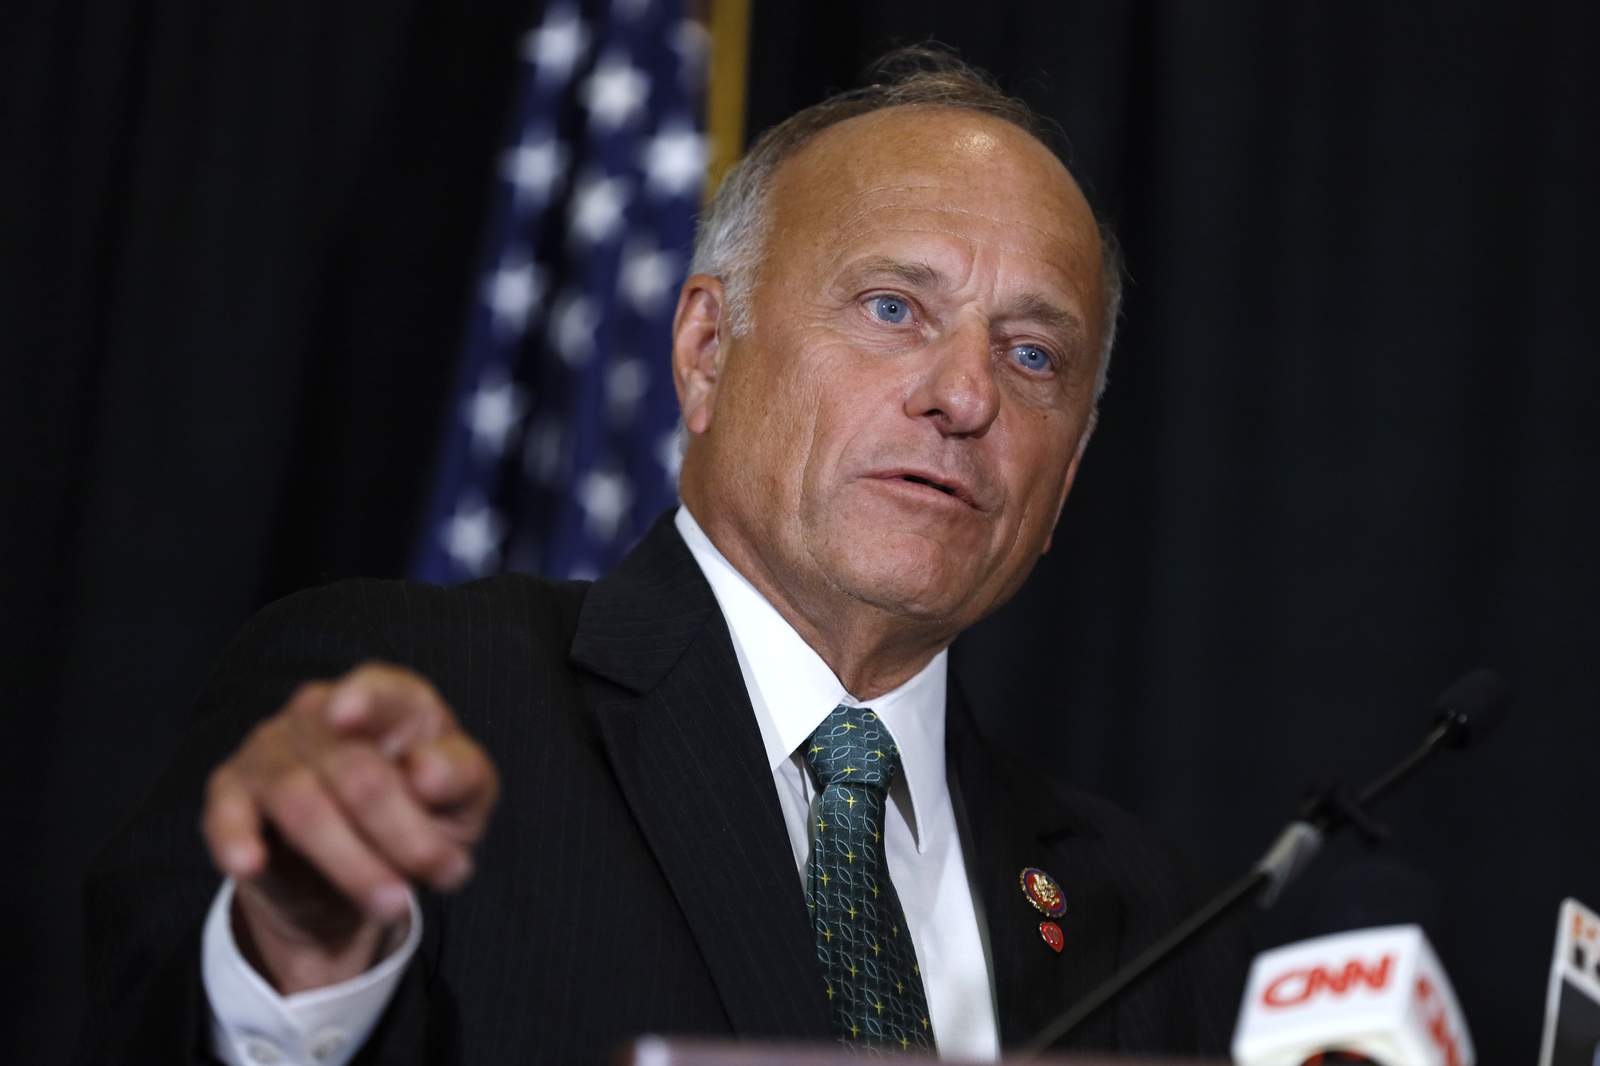 Iowa voters oust Rep. King, shunned for insensitive remarks